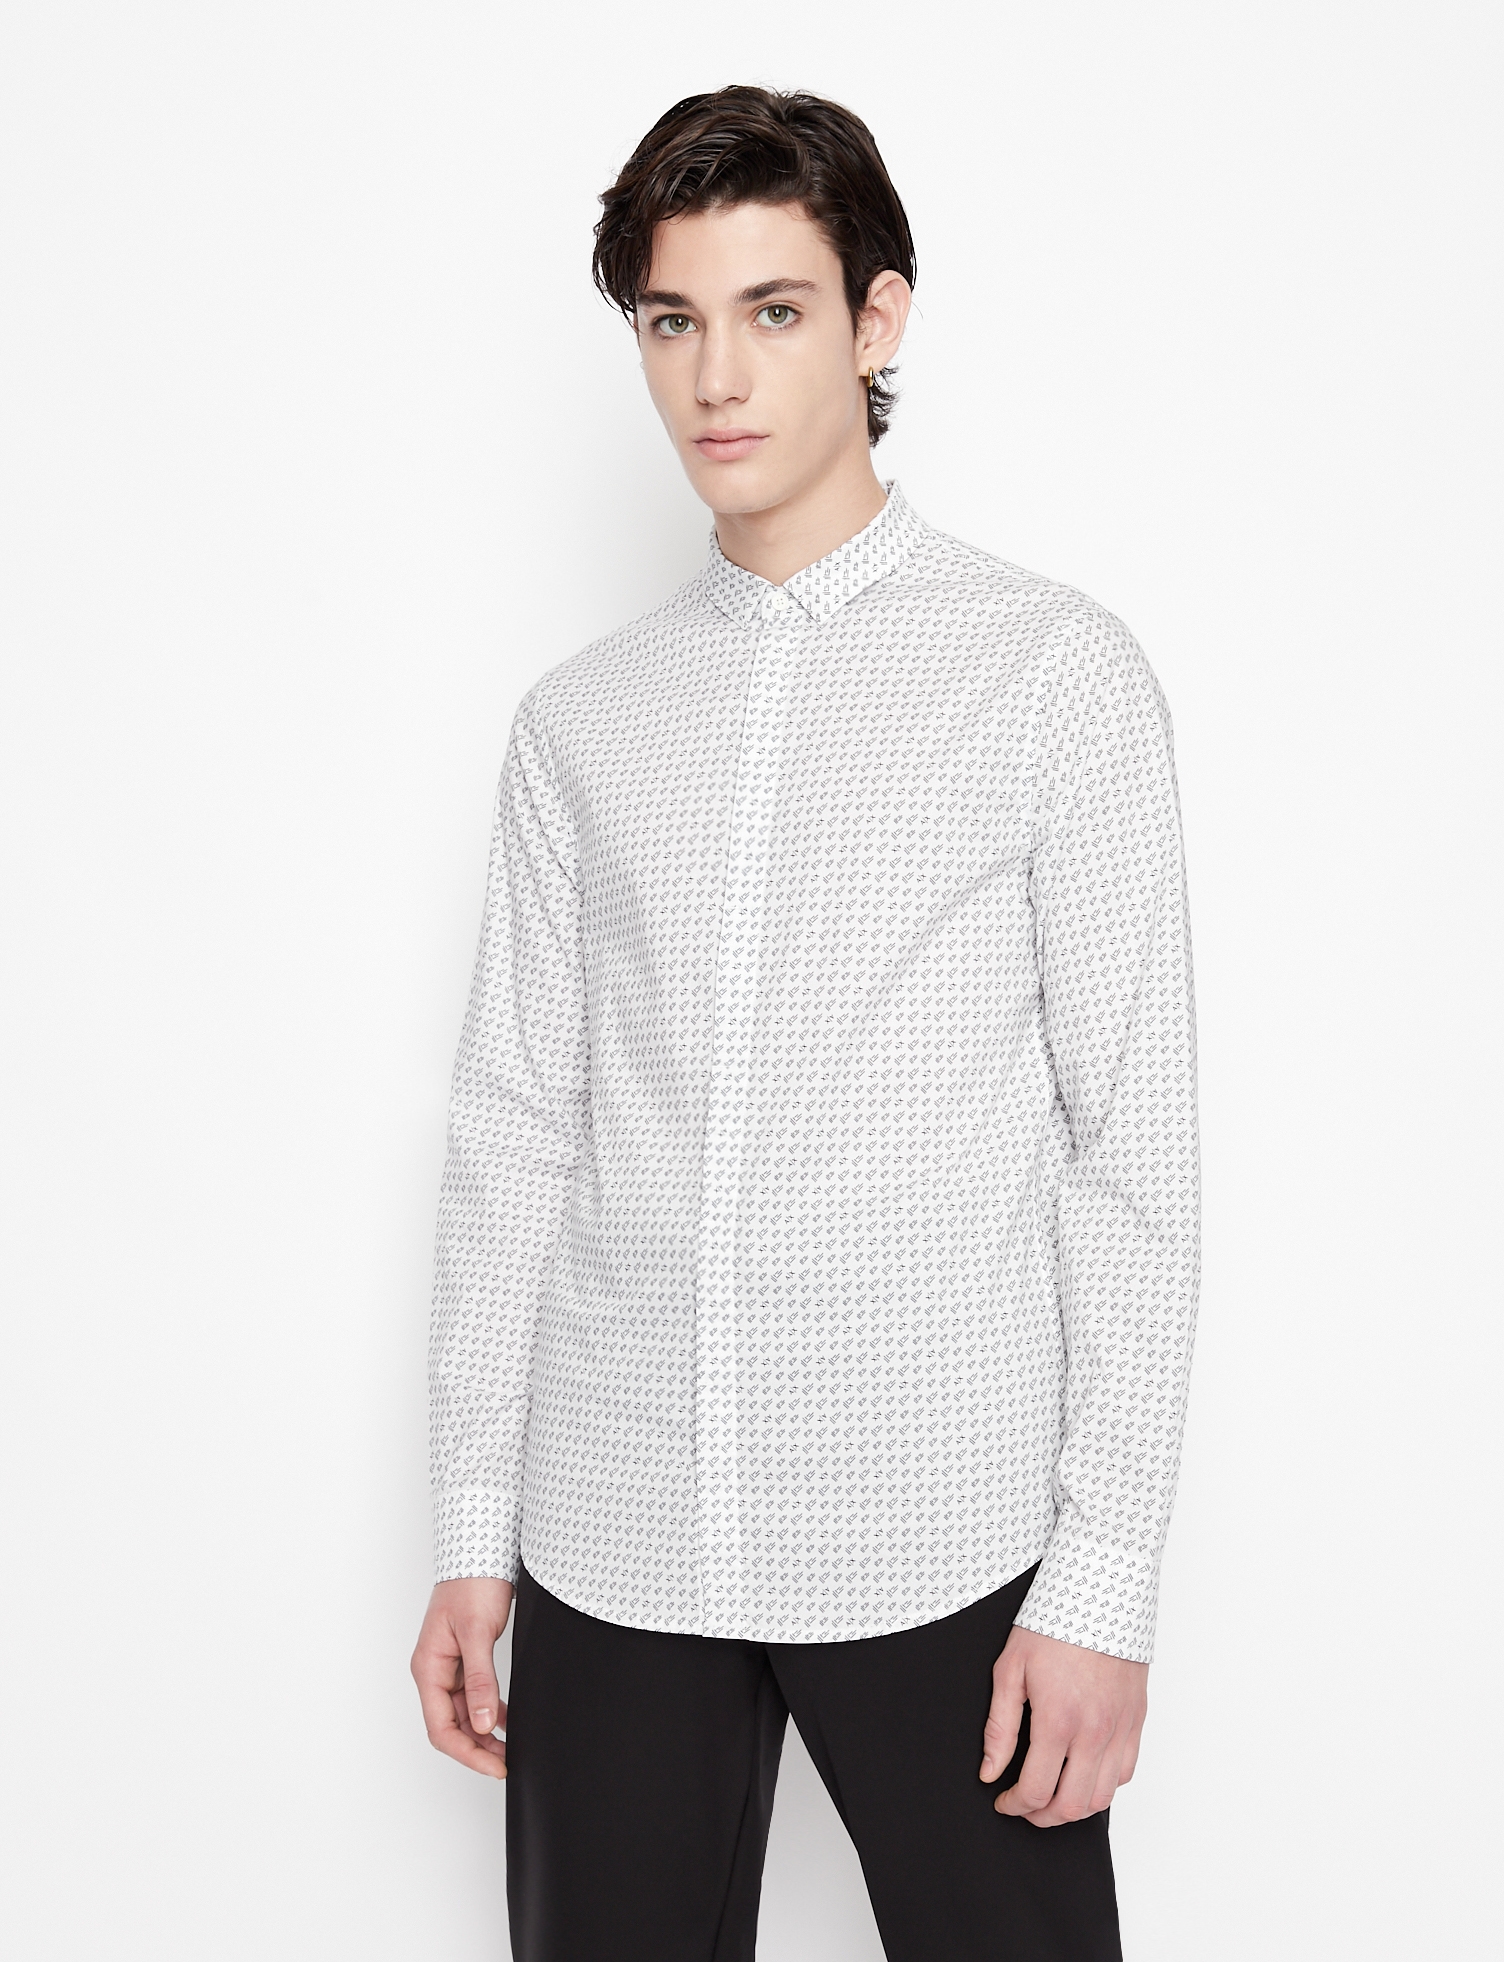 All-Over Micro Logo Print Slim Fit Shirt with Concealed Placket